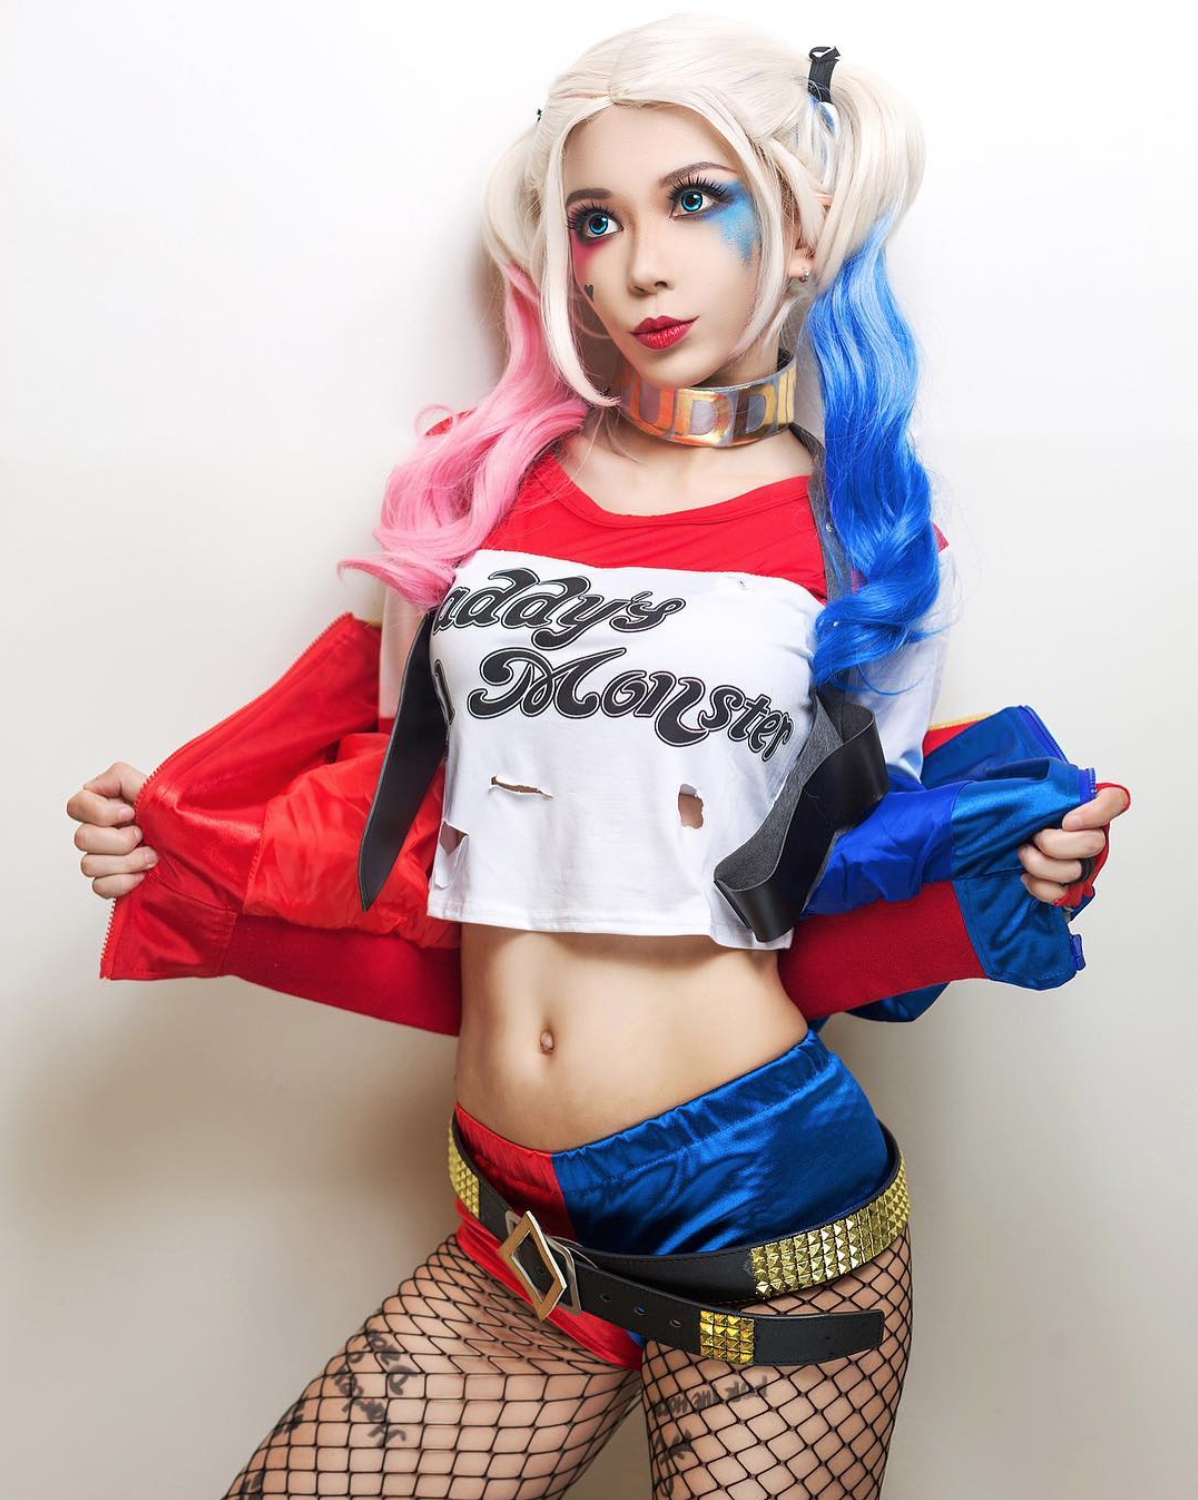 The Best Harley Quinn Cosplay.